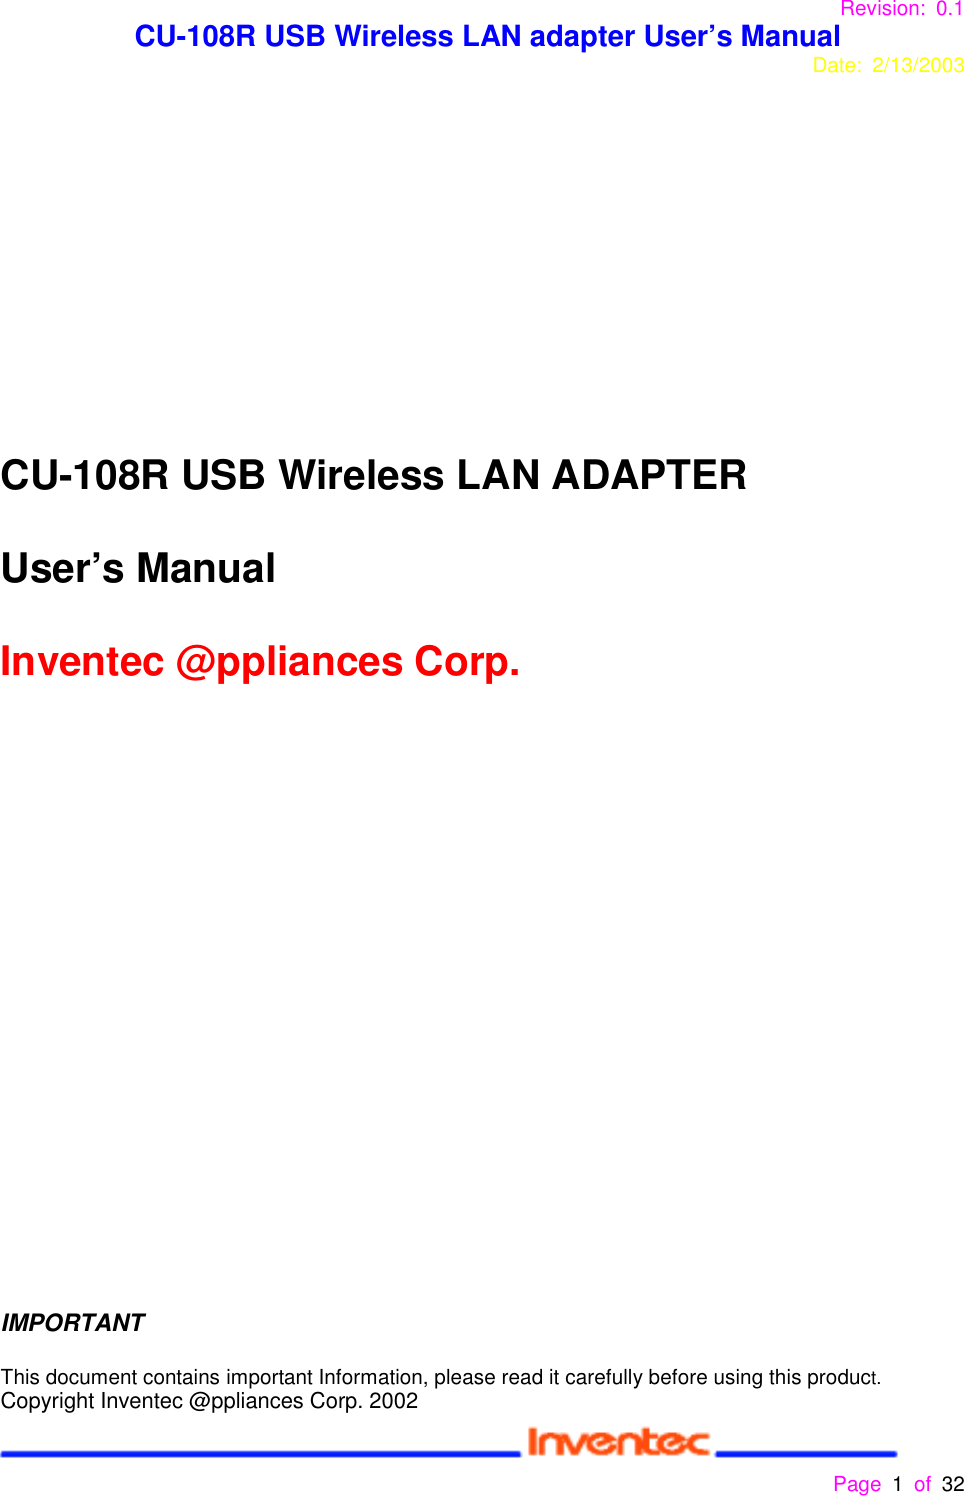 Revision: 0.1 CU-108R USB Wireless LAN adapter User’s ManualDate: 2/13/2003 Page 1 of 32 CU-108R USB Wireless LAN ADAPTERUser’s ManualInventec @ppliances Corp.IMPORTANTThis document contains important Information, please read it carefully before using this product.Copyright Inventec @ppliances Corp. 2002